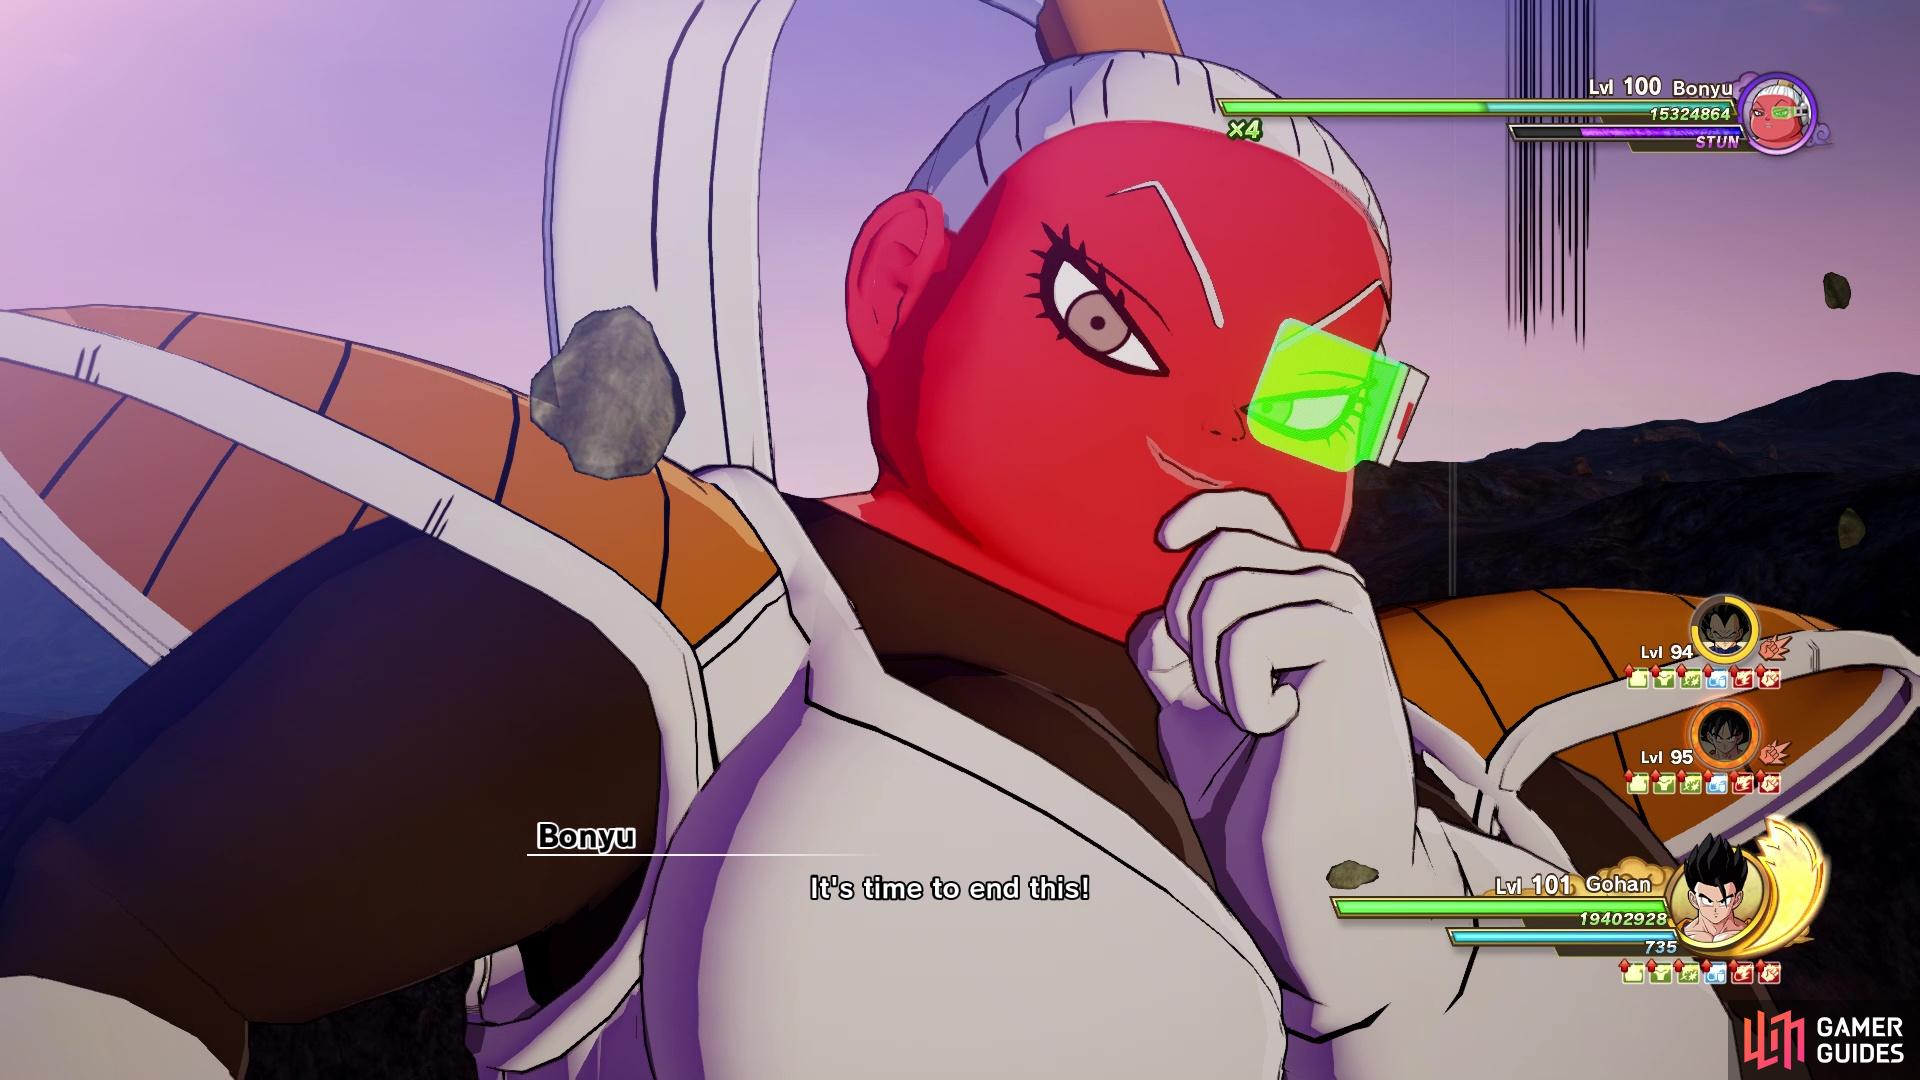 The Special Training pits you against a former member of the Ginyu Force